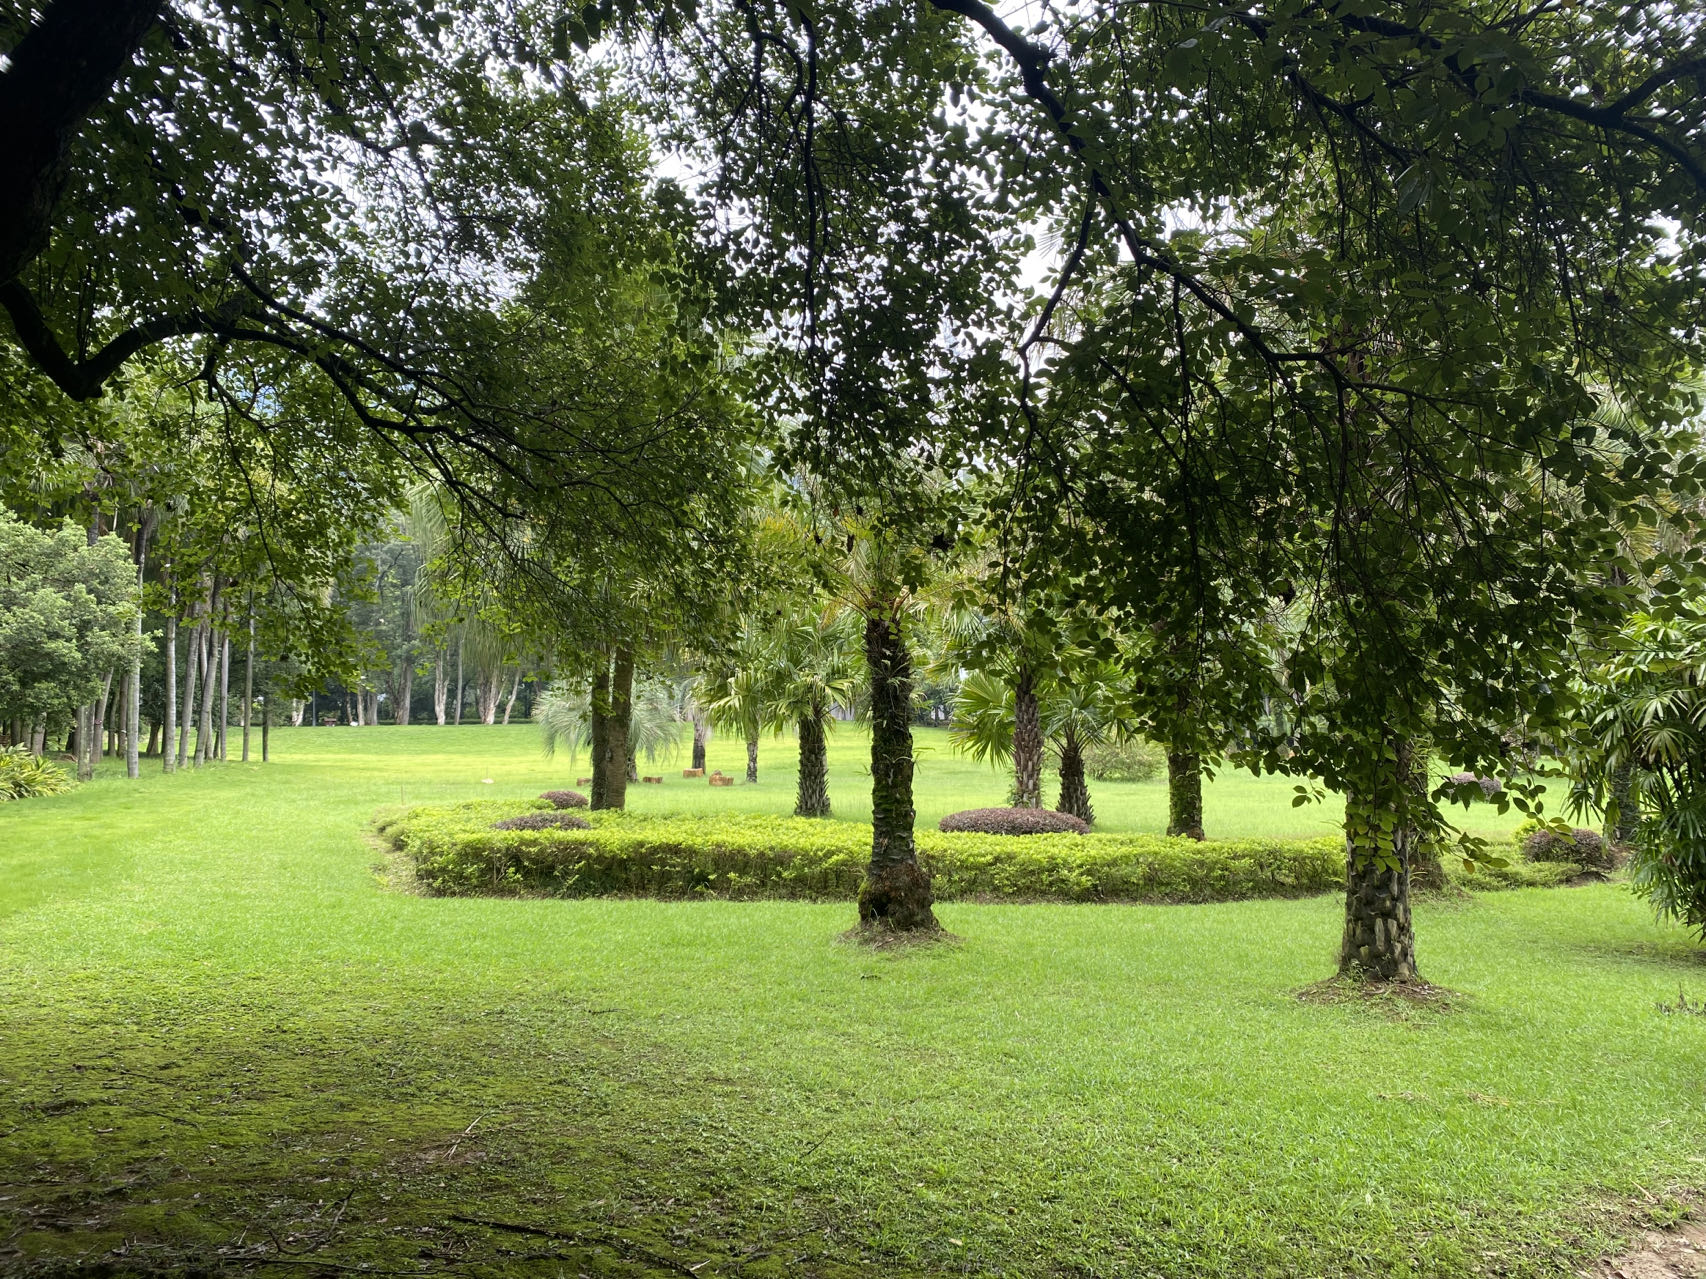 General 1706x1279 forest trees green lawns simple background minimalism nature grass landscape